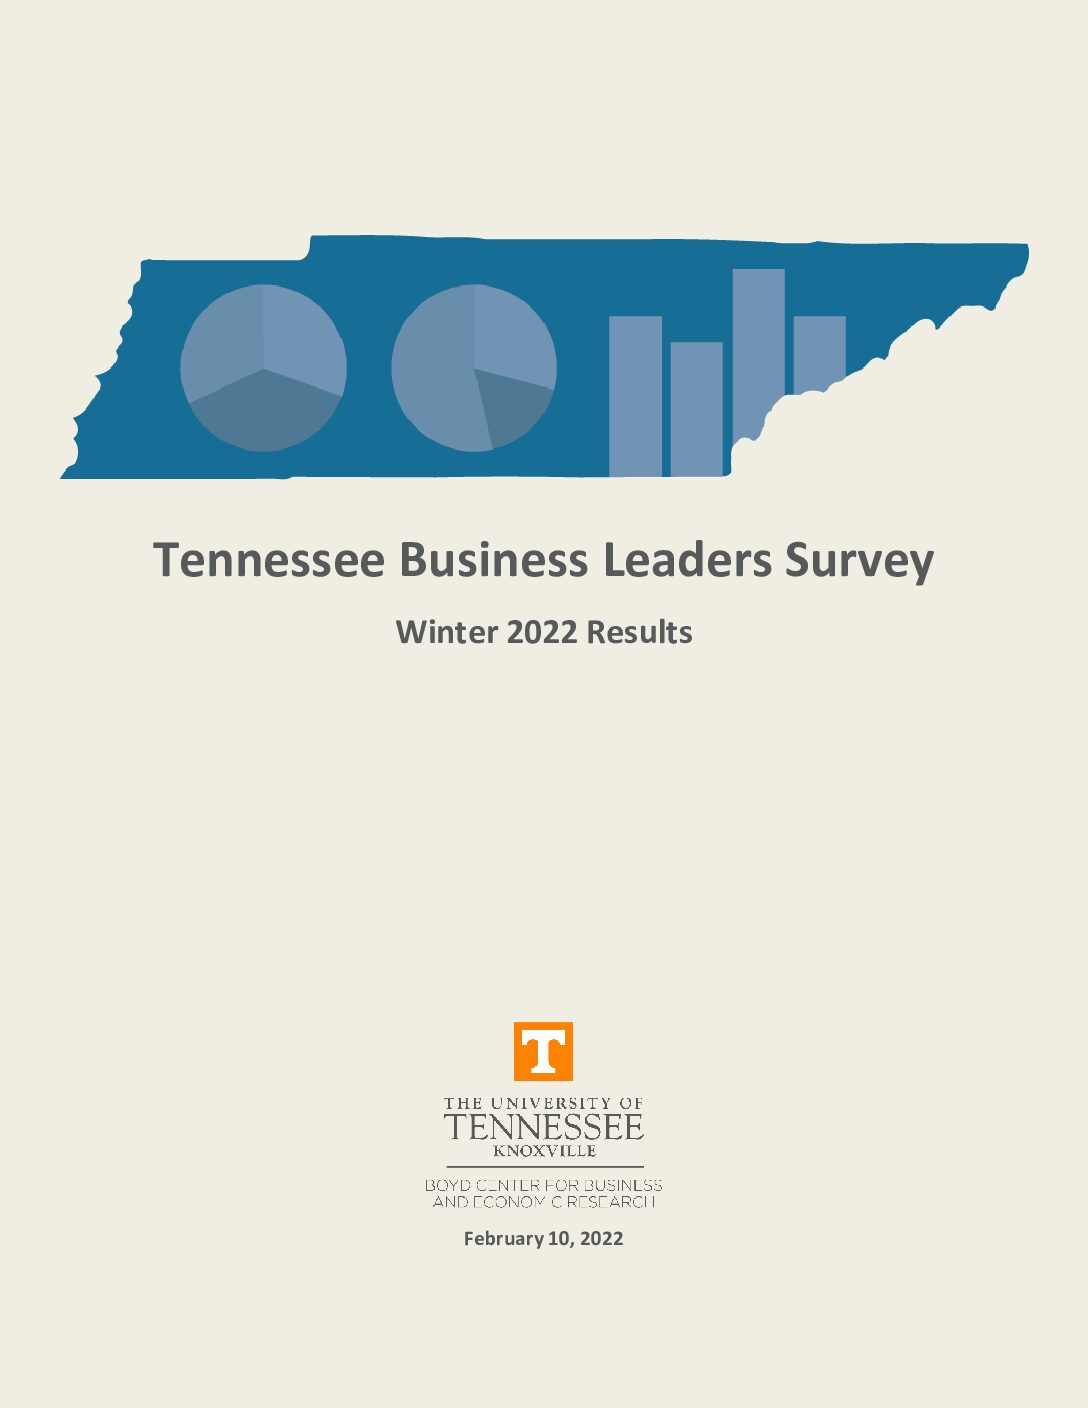 Tennessee Business Leaders Survey, Winter 2022